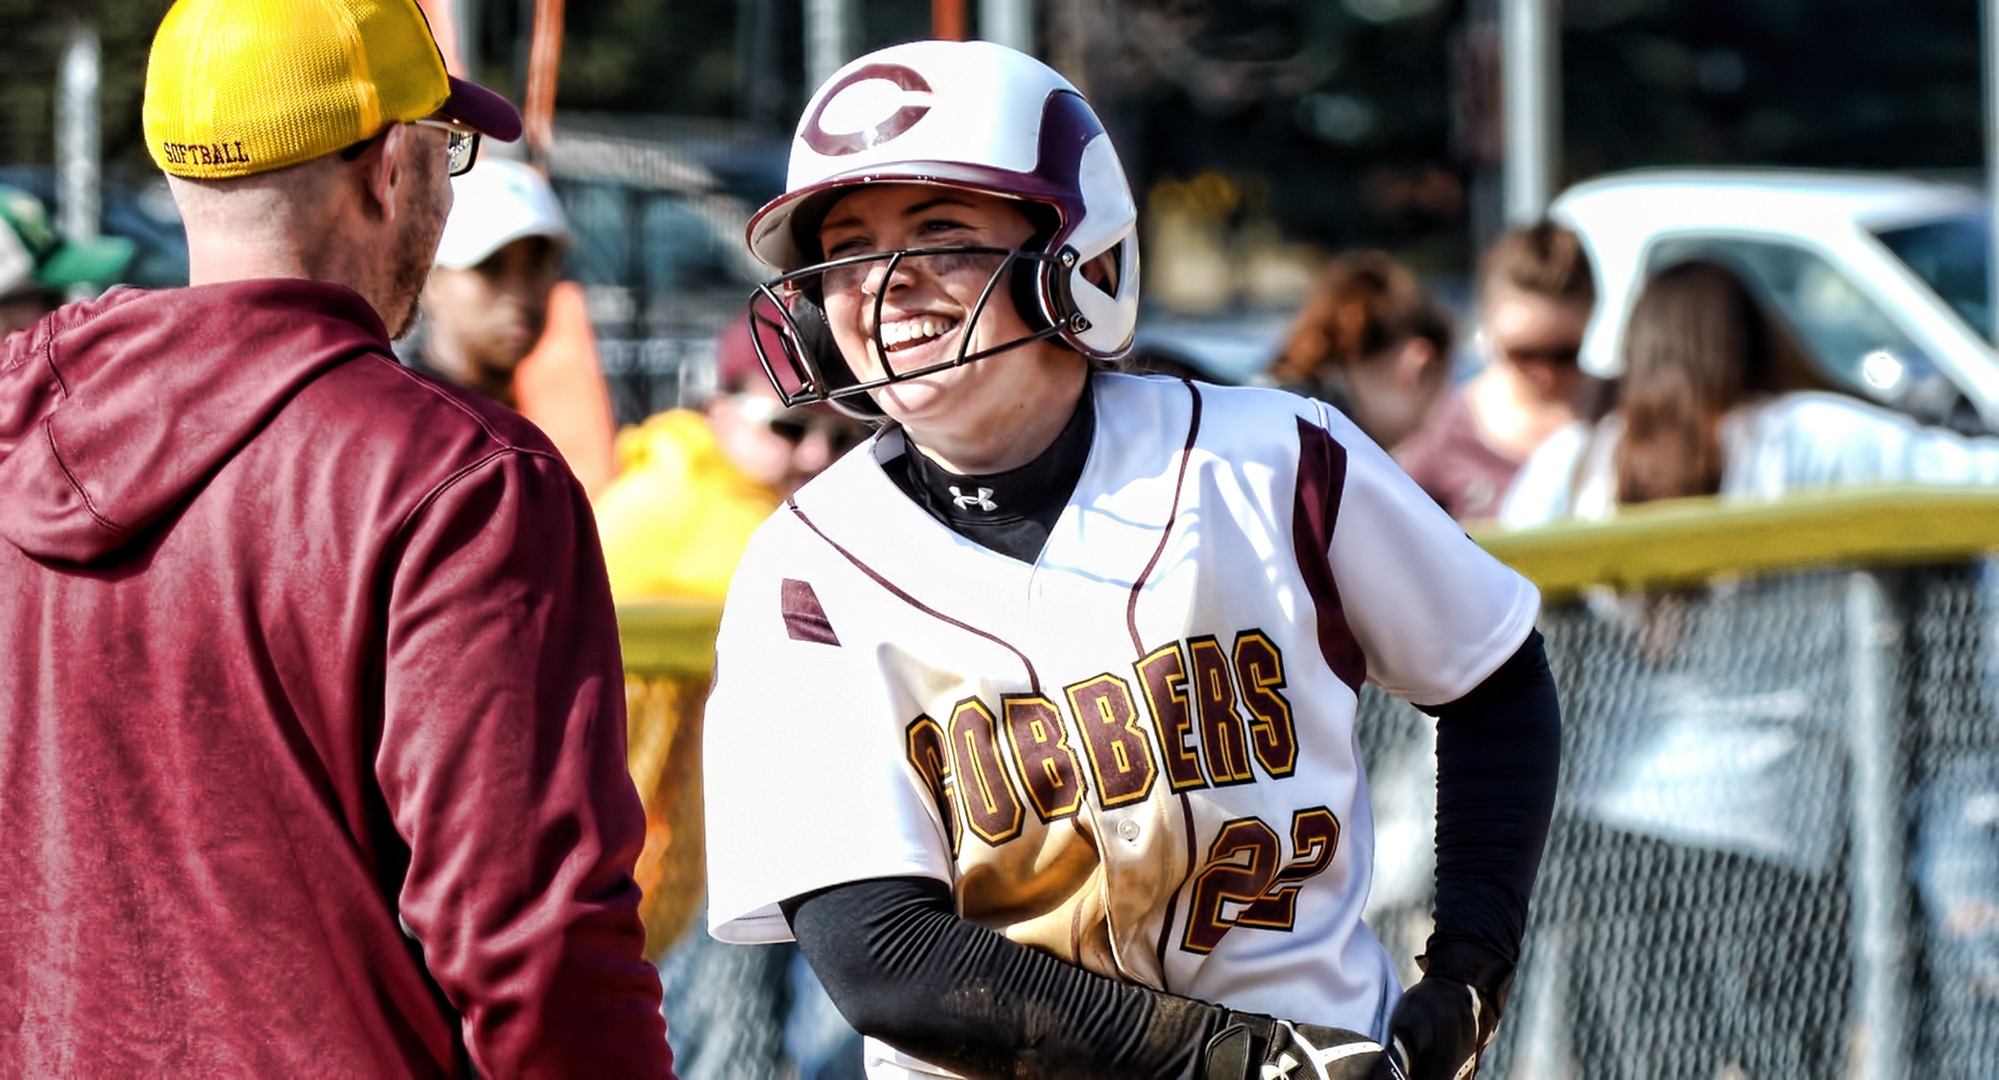 Elizabeth Asp is all smiles in Florida as she went 7-for-7 on Tuesday to help the Cobbers post wins over Houghton and Johnson State.